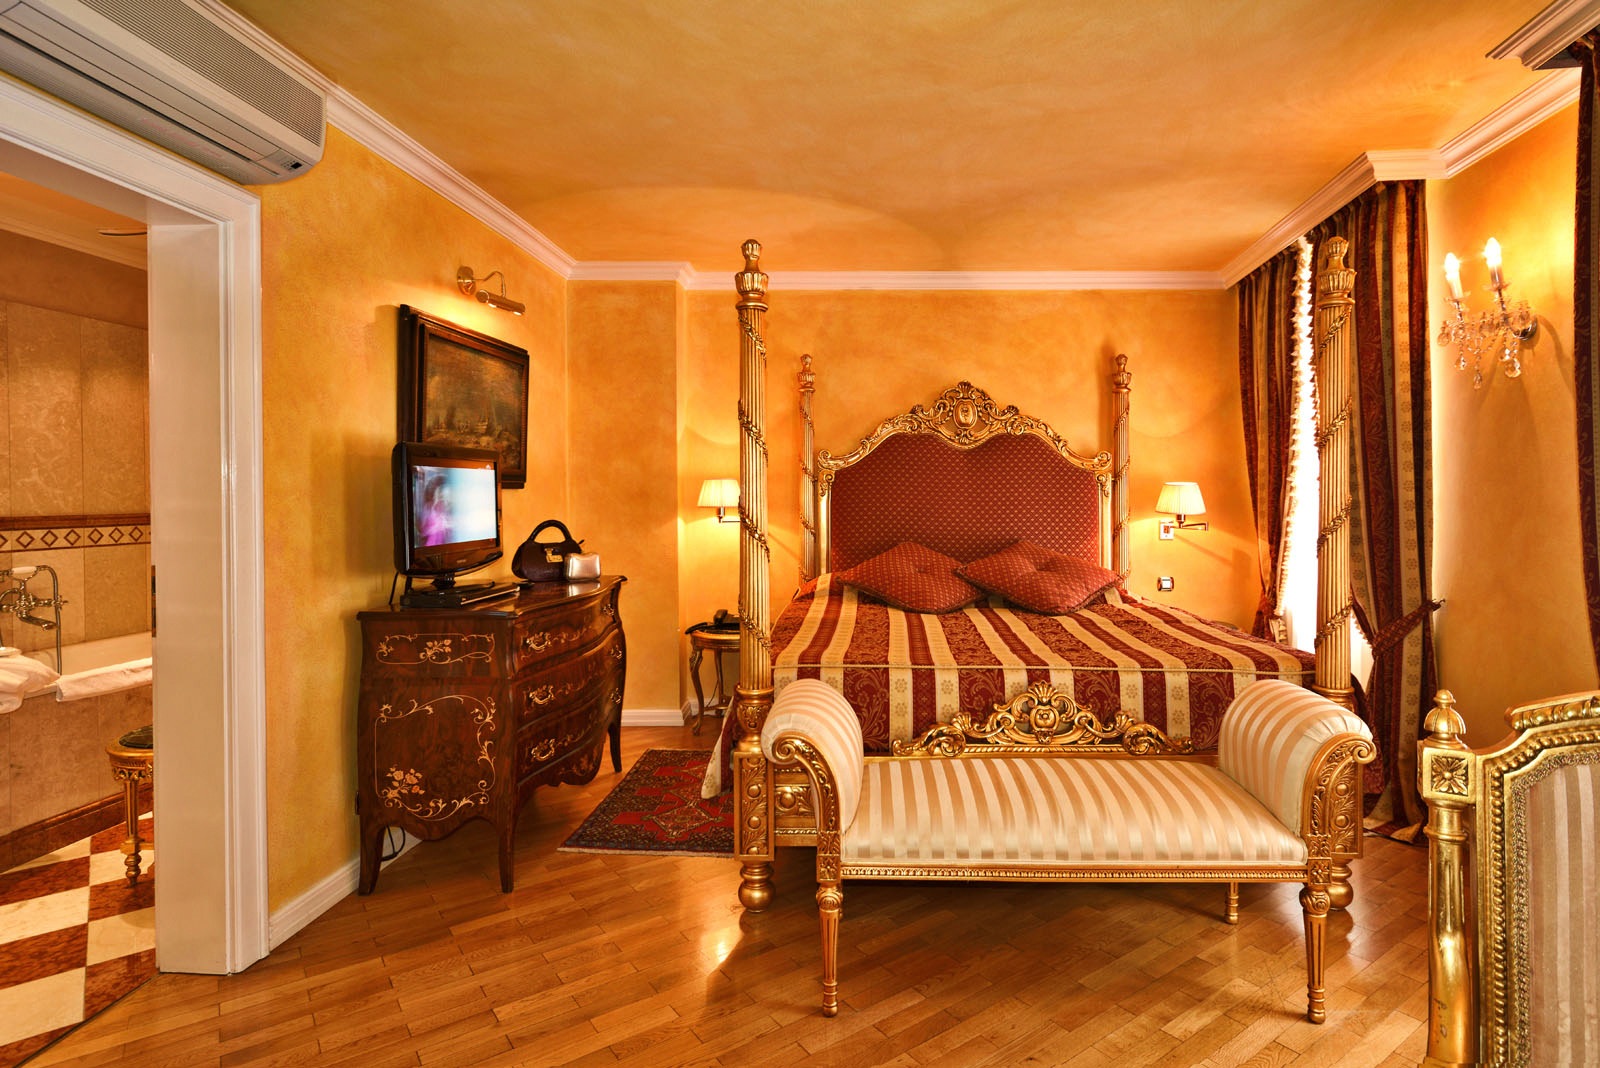 Gilt gold furniture and red and gold brocade fabrics decorate a luxury baroque era hotel room in Prague